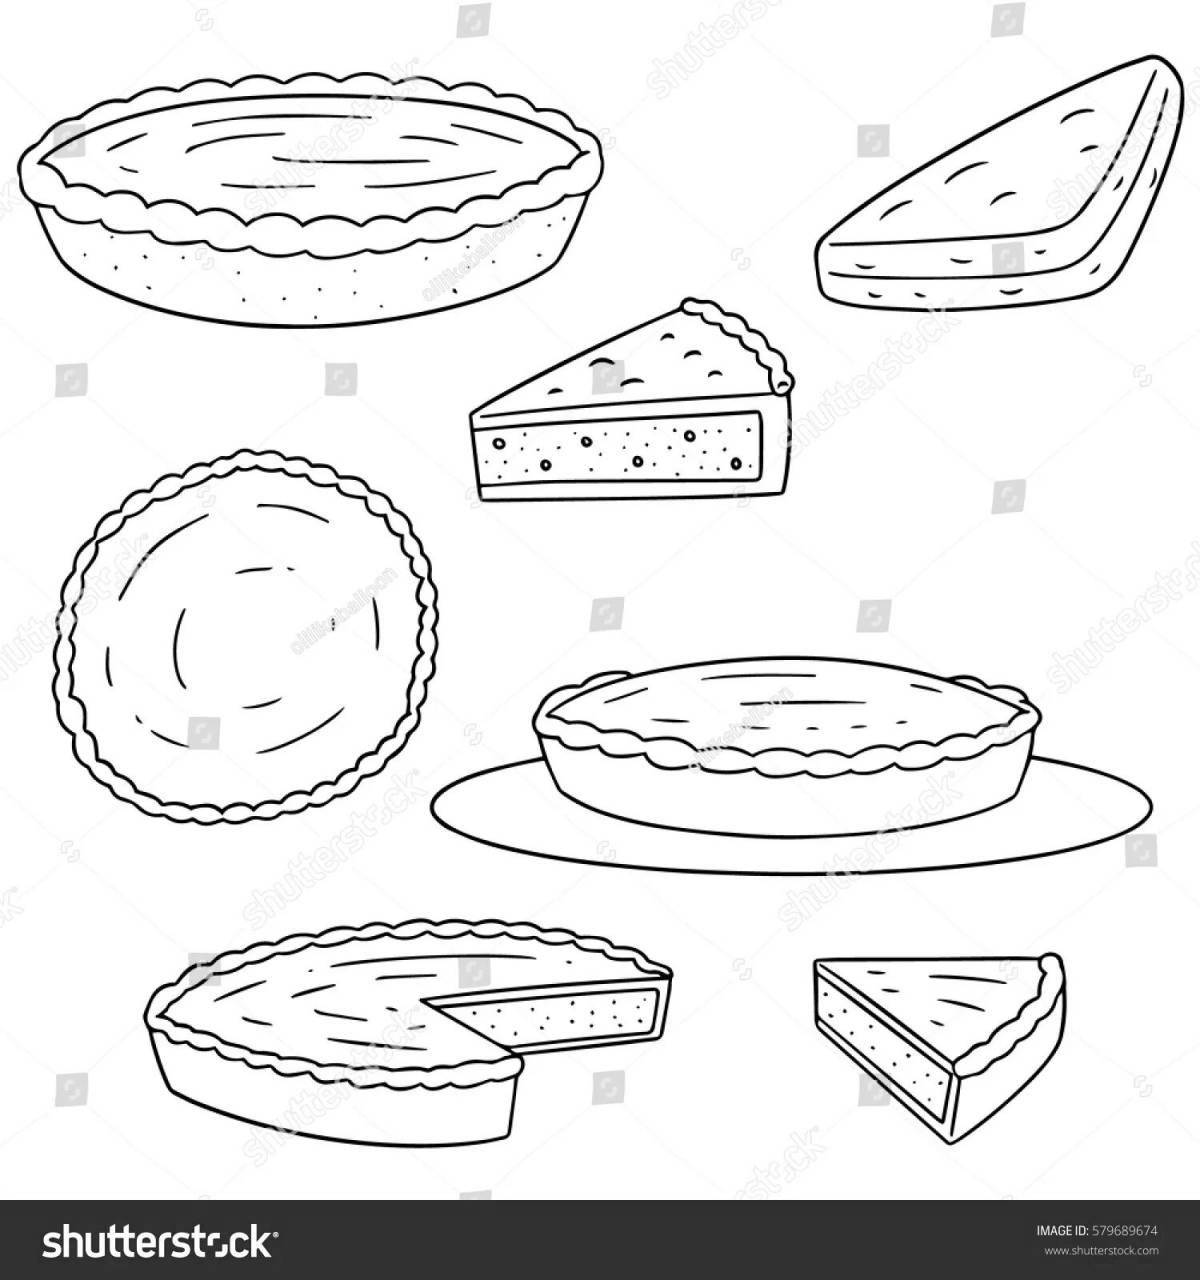 Luxury casserole coloring page